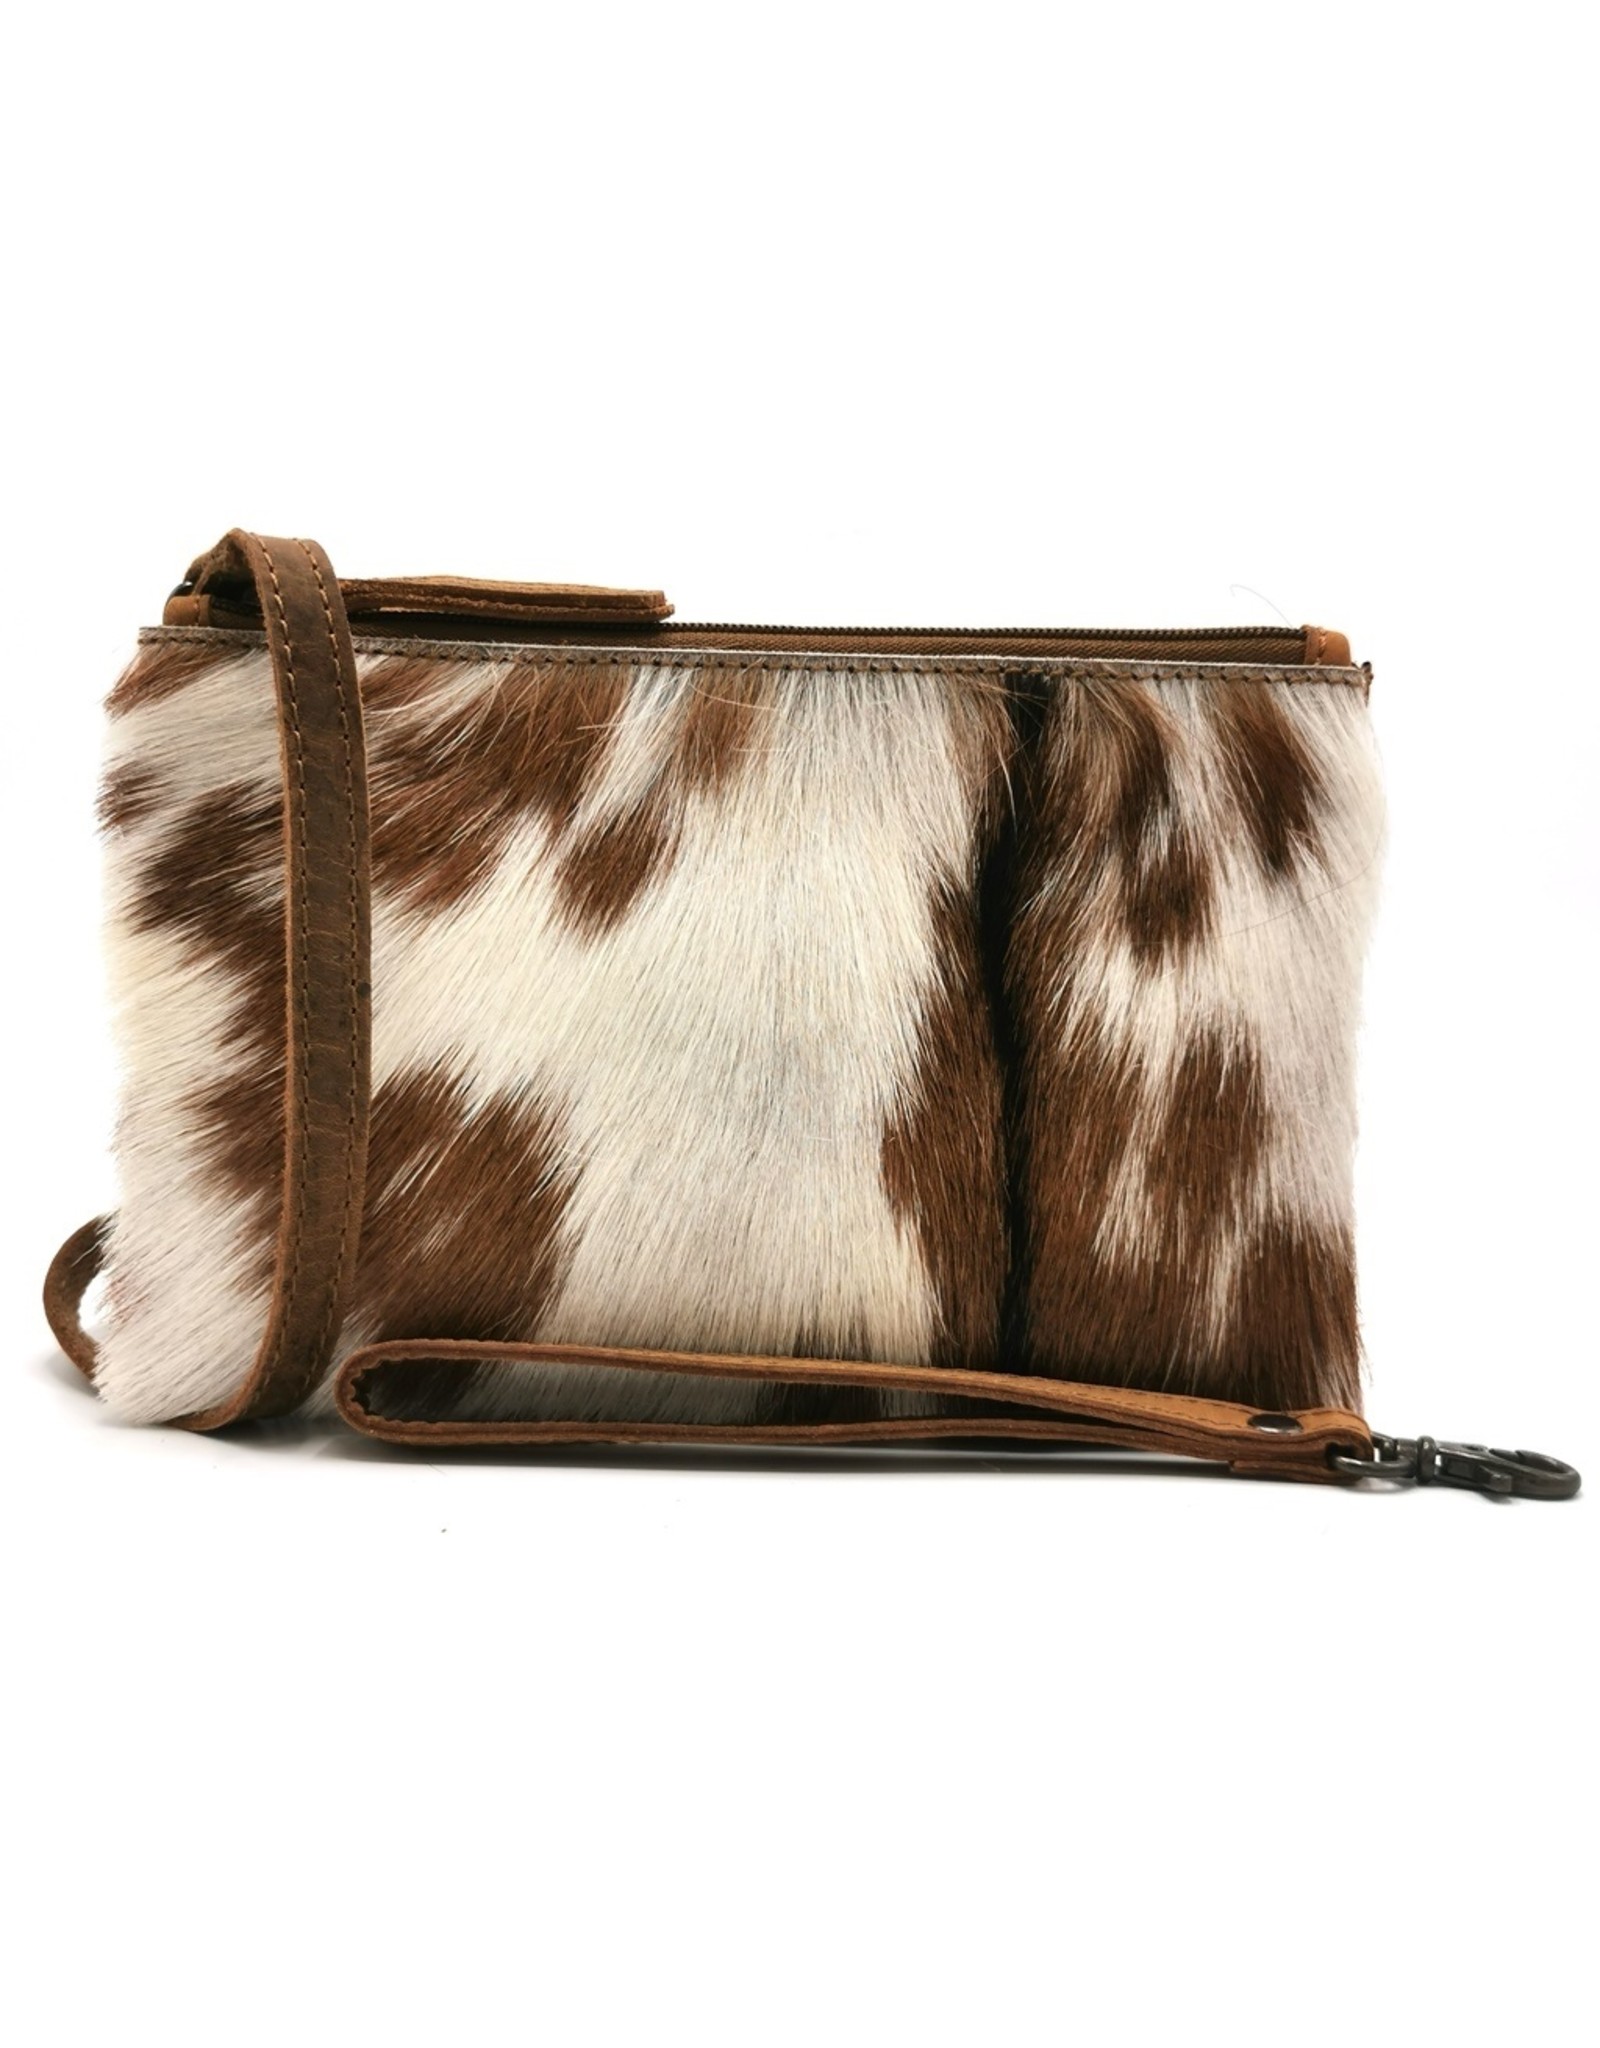 Hide & Stitches Leather Festival bags, waist bags and belt bags - Hide & Stitches Leather Shoulder Bag with Genuine Fur brown-white